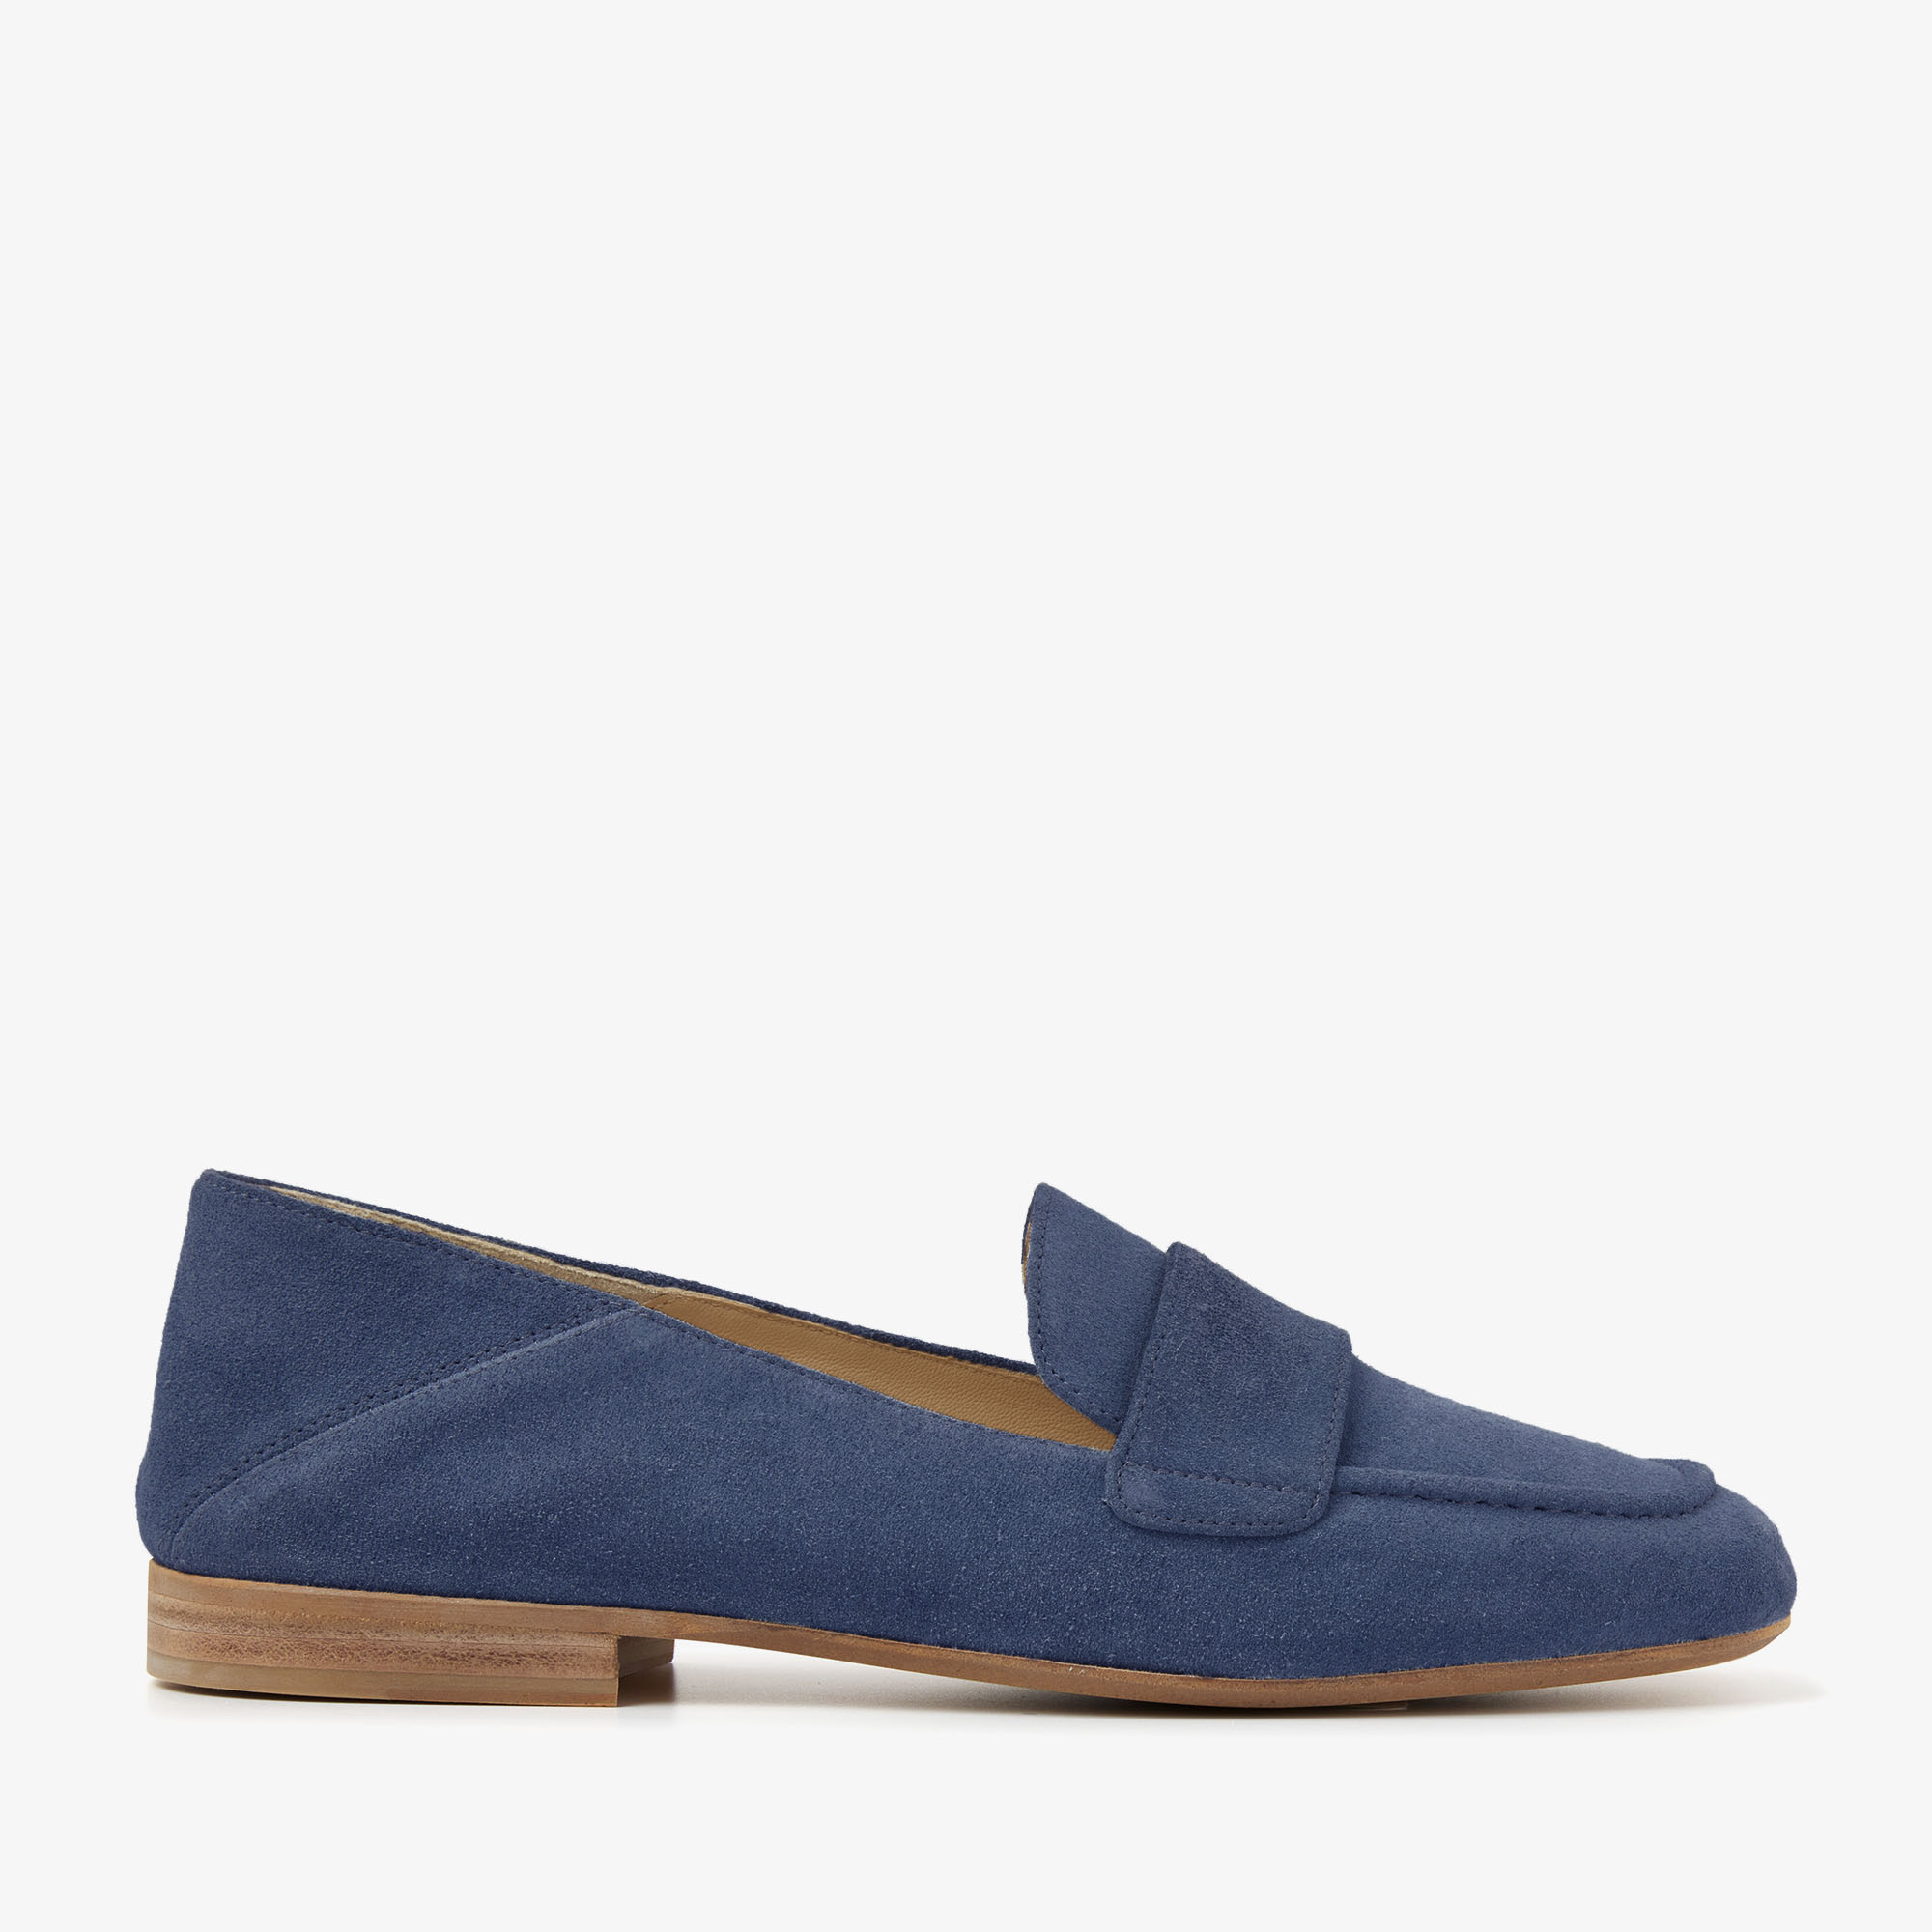 VIA VAI Indiana Cleo blauwe loafers dames - Suede